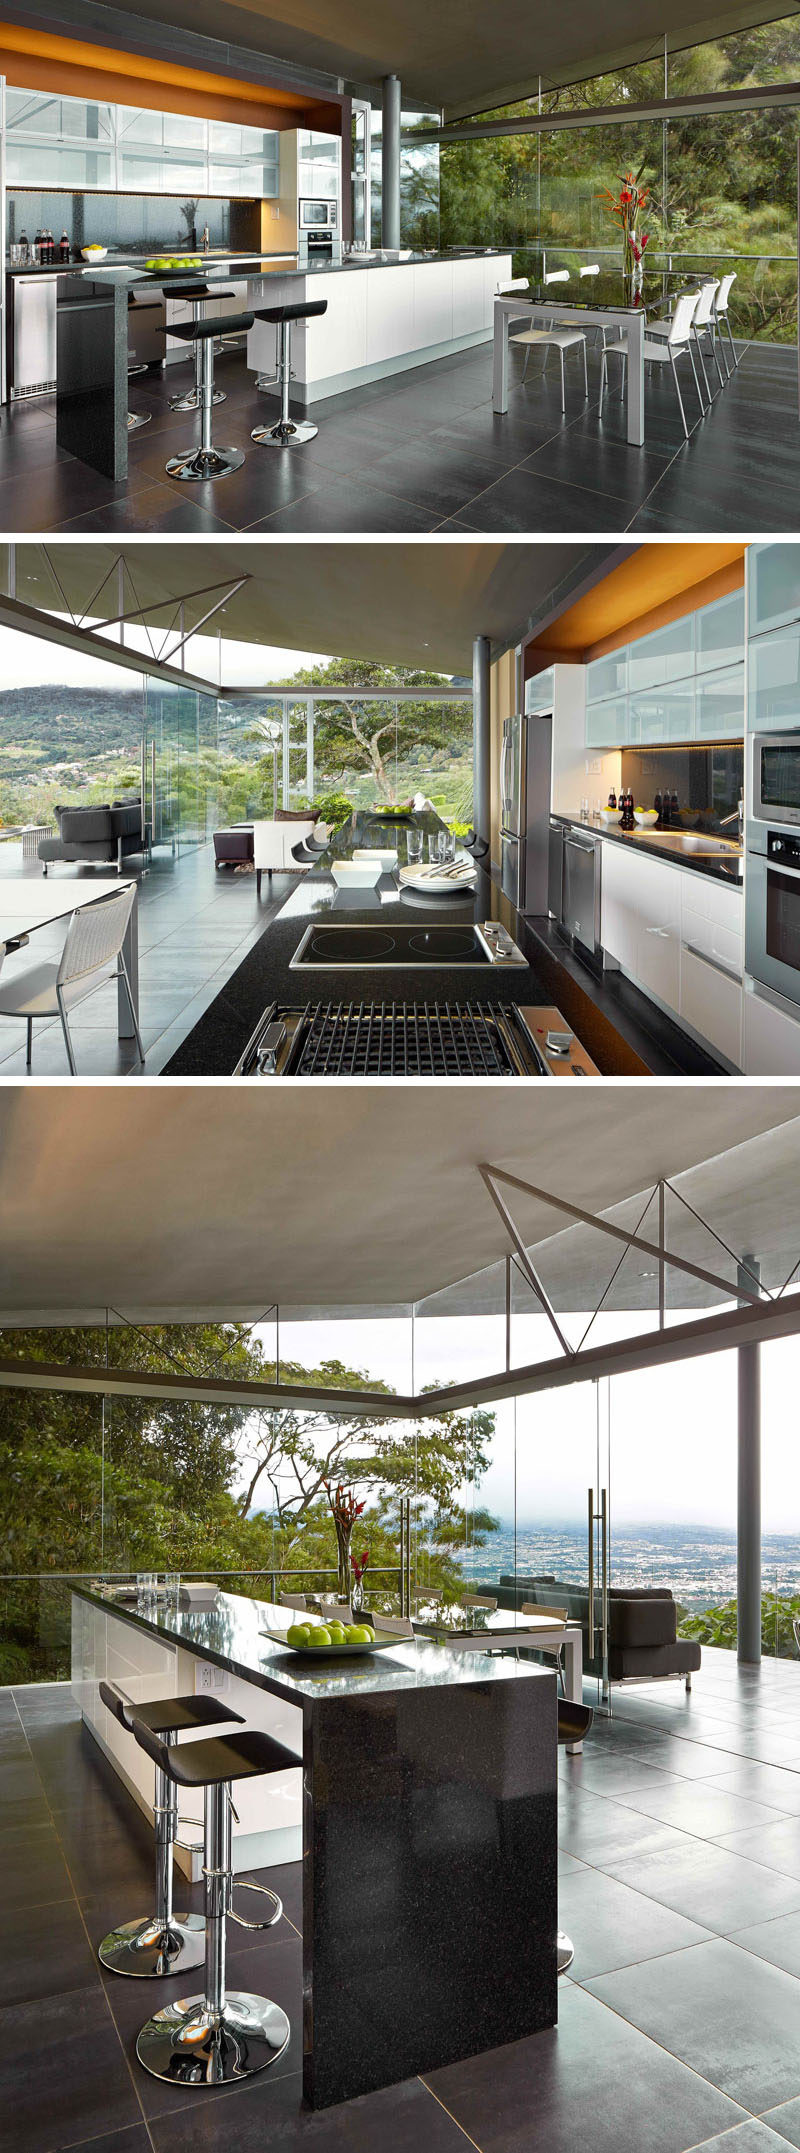 This modern kitchen has a large island with a dark countertop and additional room for counter stools. On three sides of the room are floor-to-ceiling windows, allowing guests to immerse themselves within the scenery.